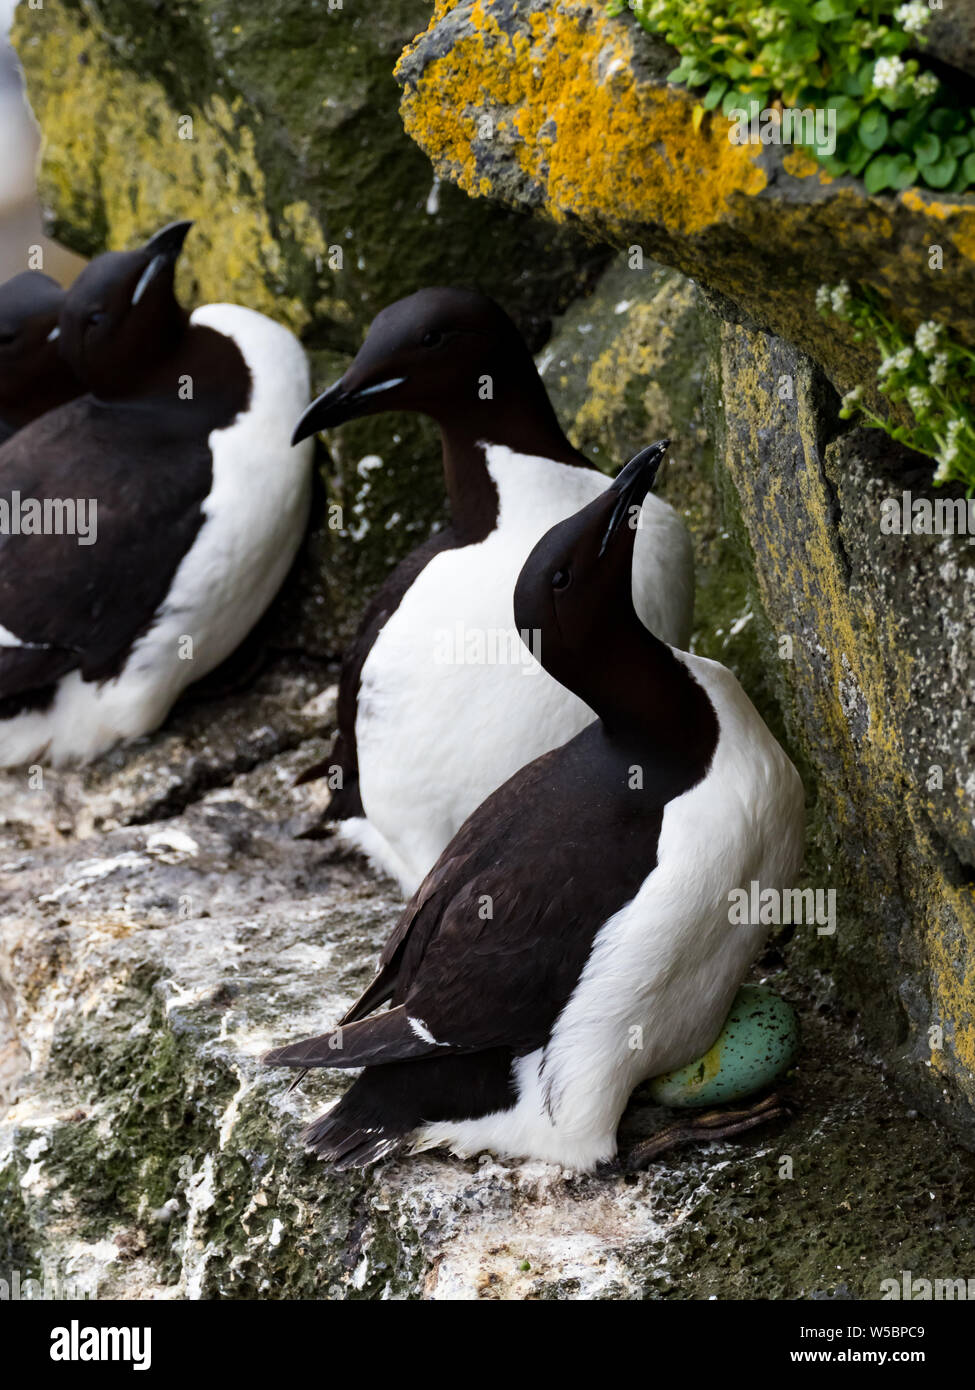 Thick-billed Murre,Uria lomvia, a nesting seabird on the cliffs of St. Paul Island in the Pribilofs Stock Photo